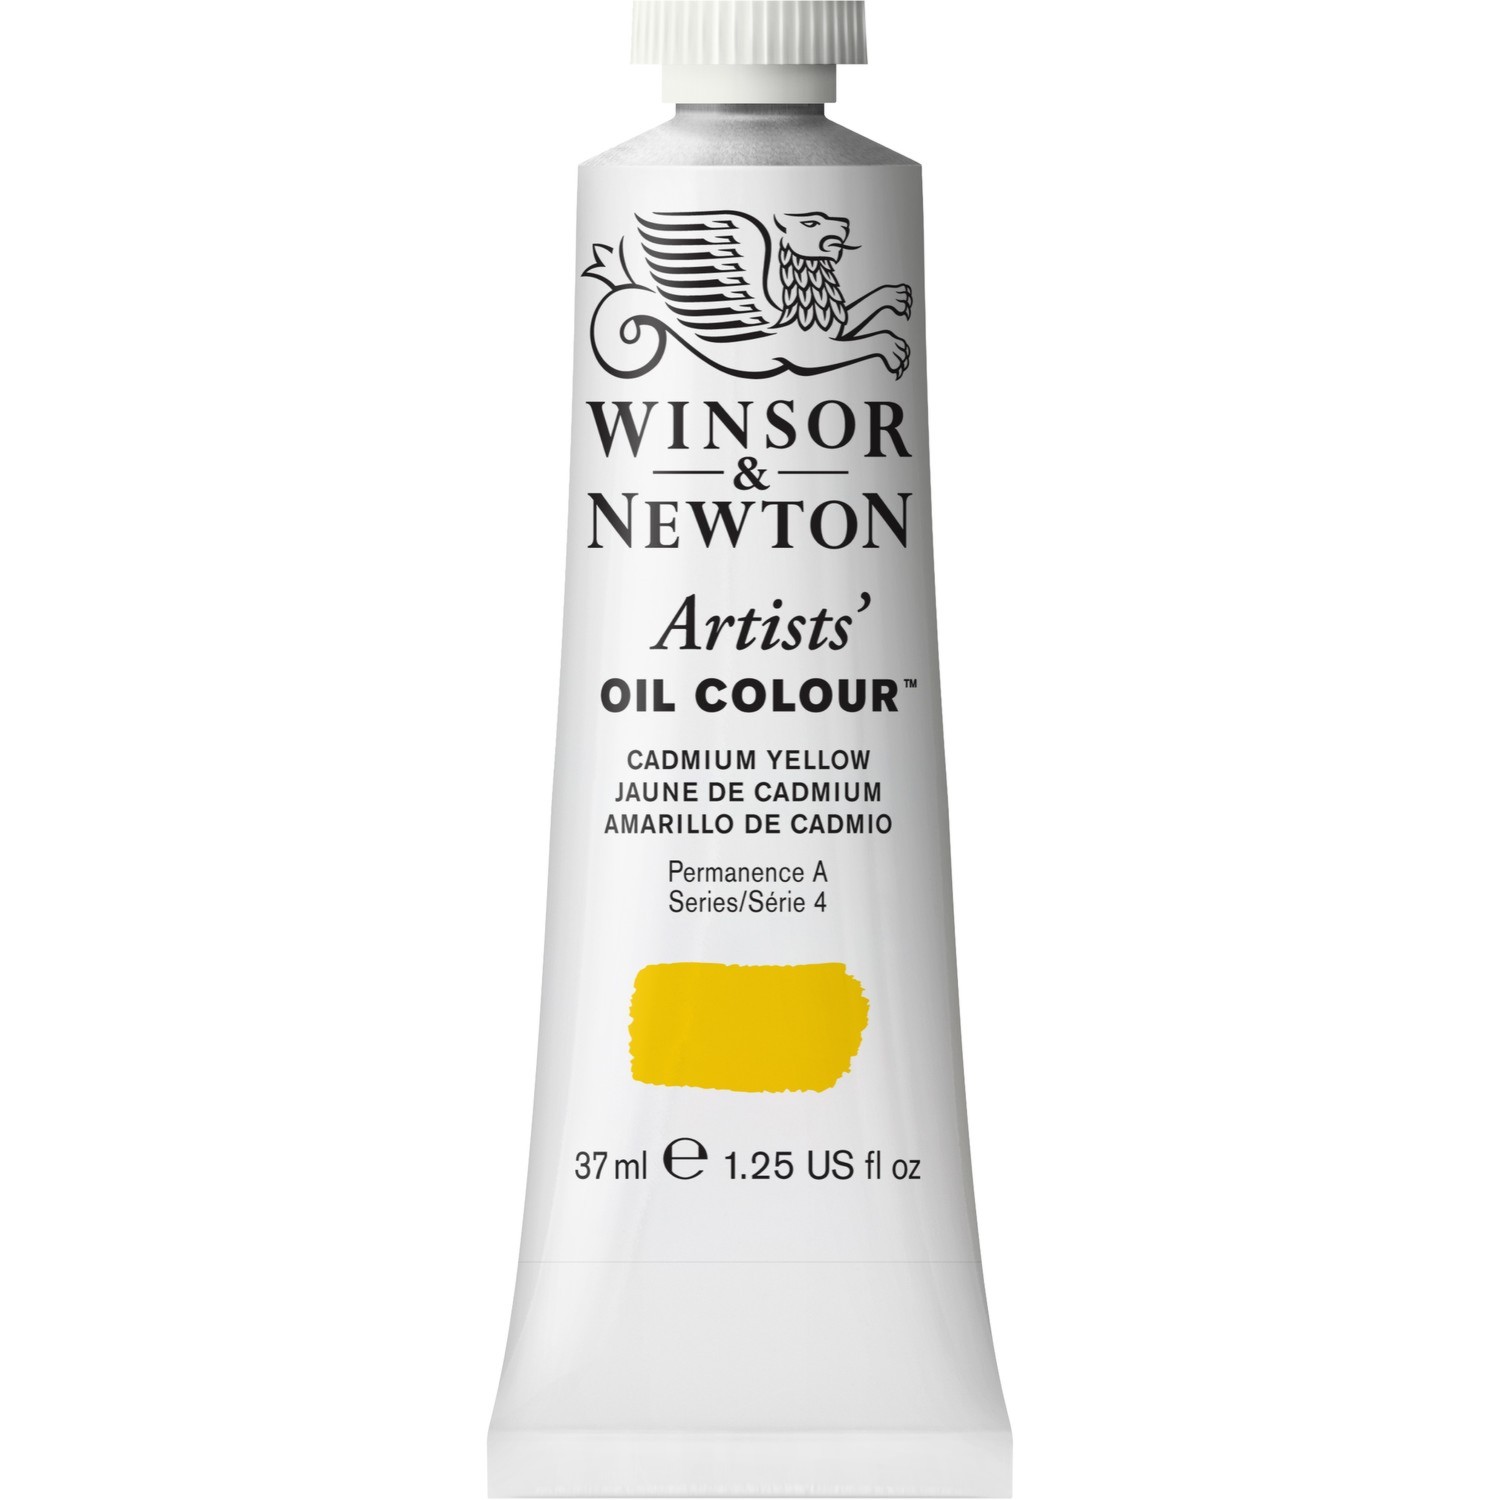 Winsor and Newton 37ml Artists' Oil Colours - Cadium Yellow Image 1